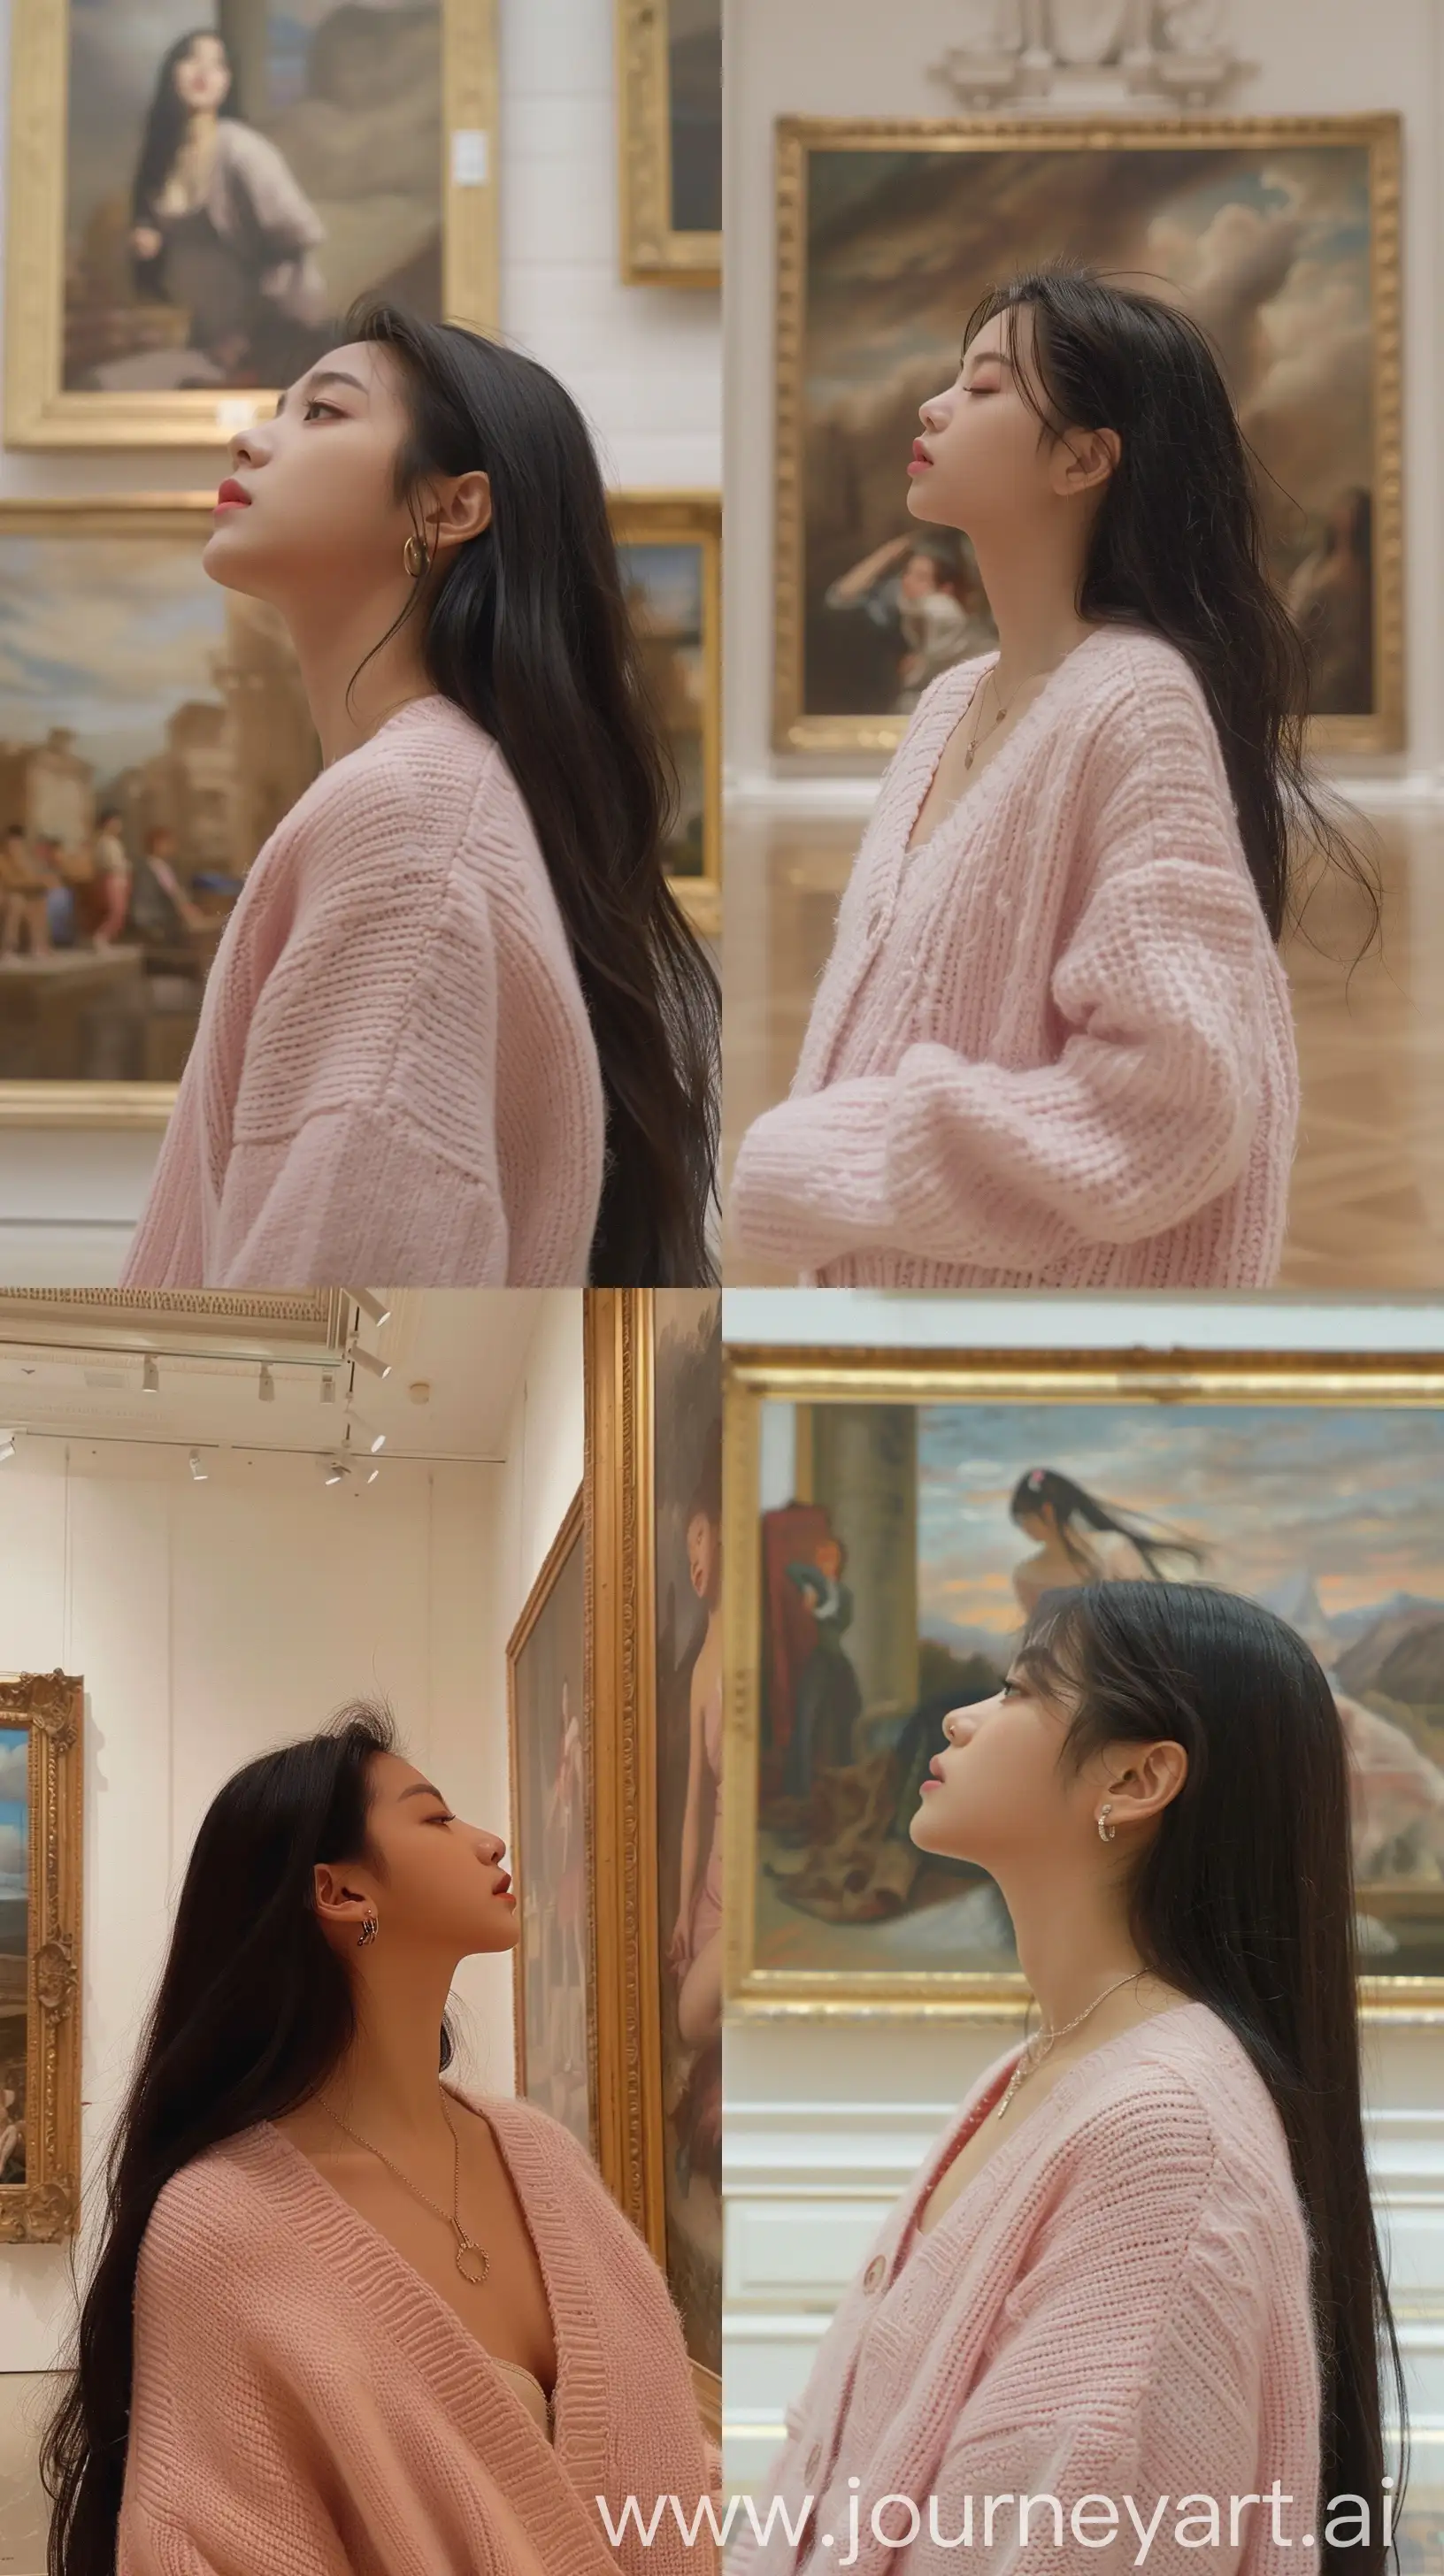 a blackpink's jennie wearing soft pink cardigan, throw face away, profile, front of painting inside art gallery,  --ar 9:16 